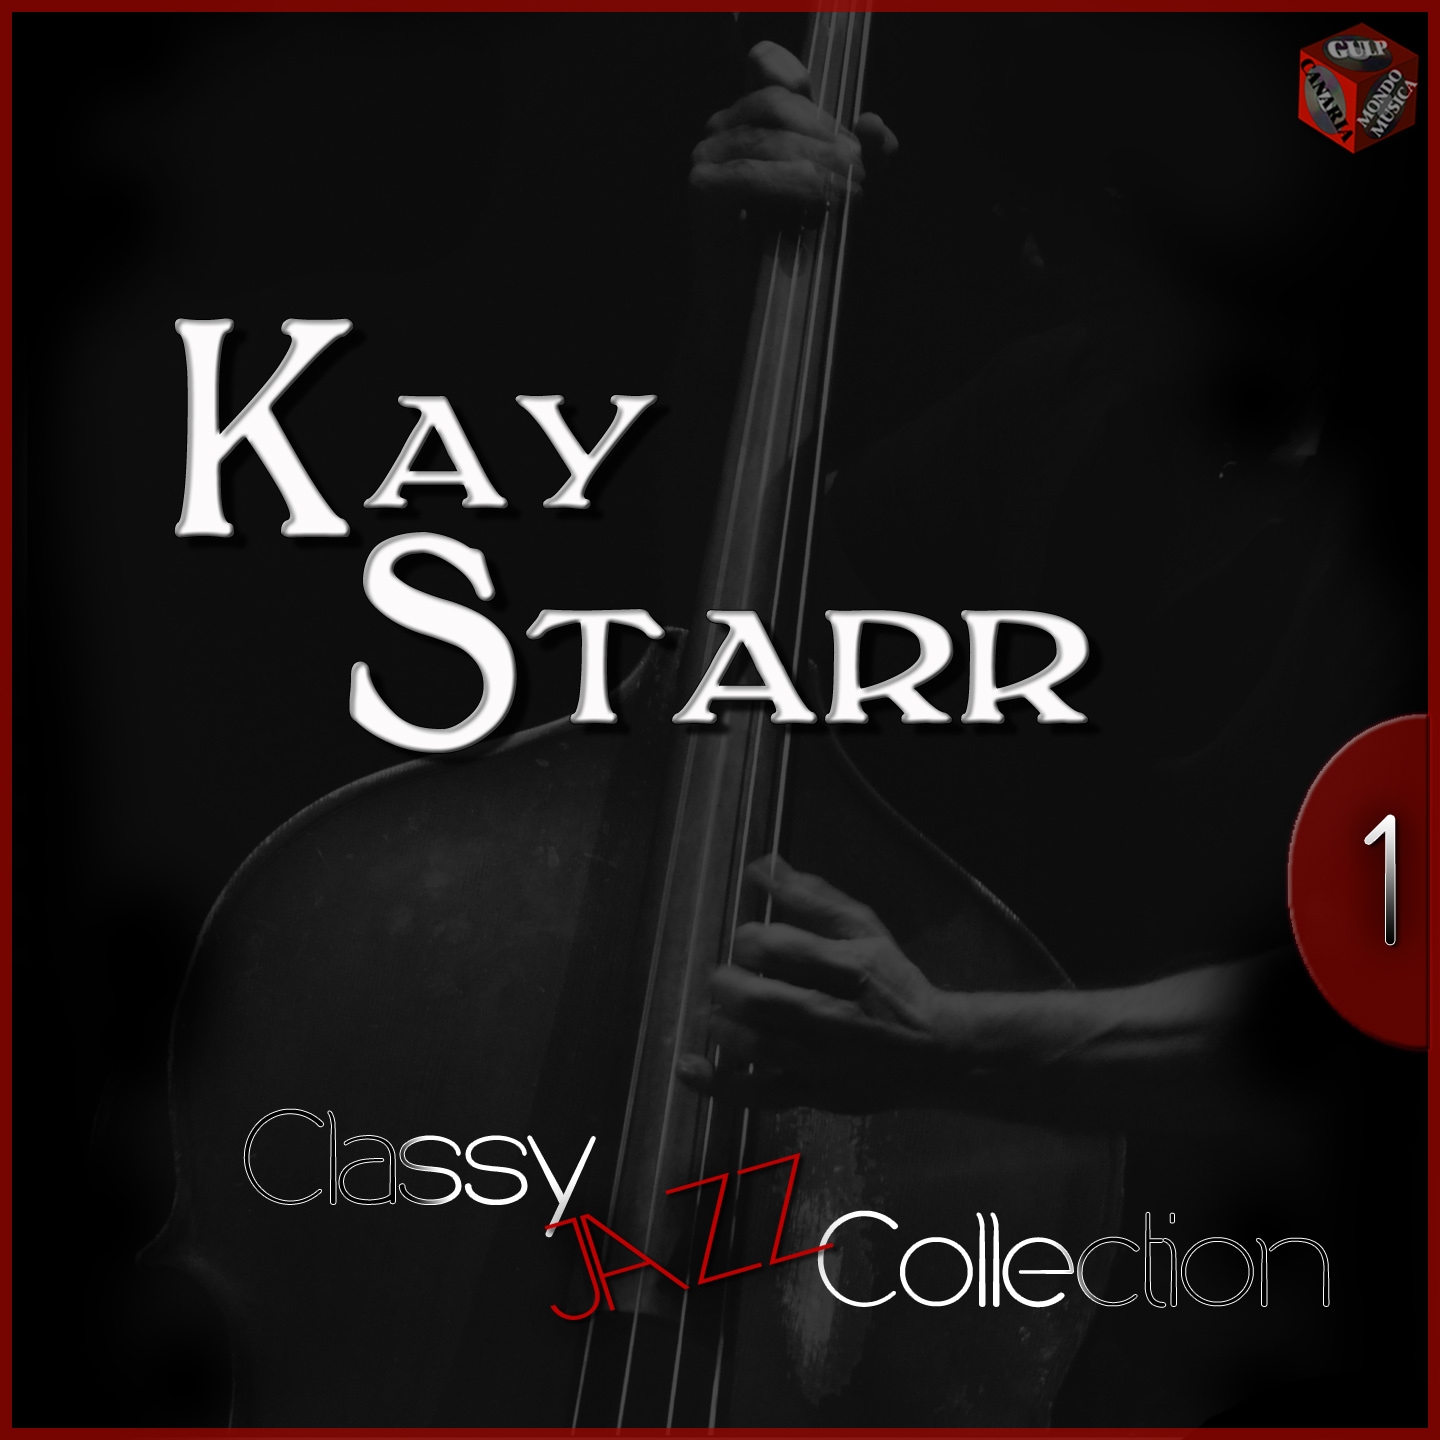 Classy Jazz Collection: Kay Starr, Vol. 1